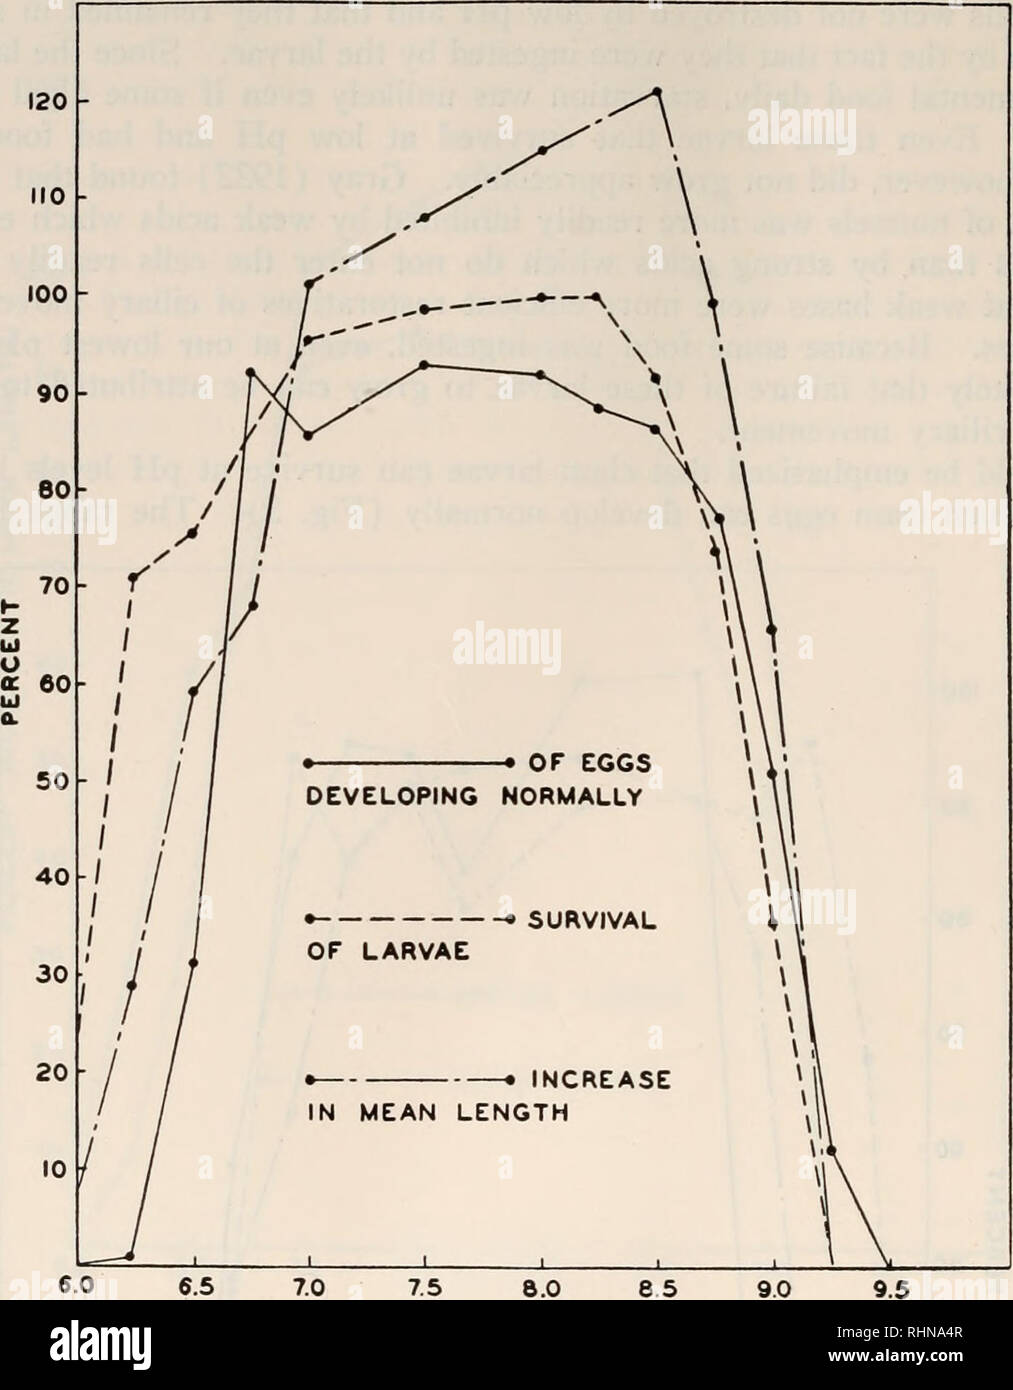 . The Biological bulletin. Biology; Zoology; Biology; Marine Biology. 434 ANTHONY CALABRESE AND HARRY C. DAVIS 120 - DEVELOPING NORMALLY -• SURVIVAL LARVAE. 75 8.0 8.5 ADJUSTED INITIAL PH FIG. 6. The pH tolerance of oyster embryos and larvae as indicated by percentage of eggs that developed normally, survival of larvae, and increase in mean length of larvae. survival of larvae was 6.25 to 8.75, whereas the range for normal embryonic devel- opment was only 7.00 to 8.75. In environments with a pH below 7.00, failure of clam eggs to develop normally would be the factor that would limit recruitmen Stock Photo